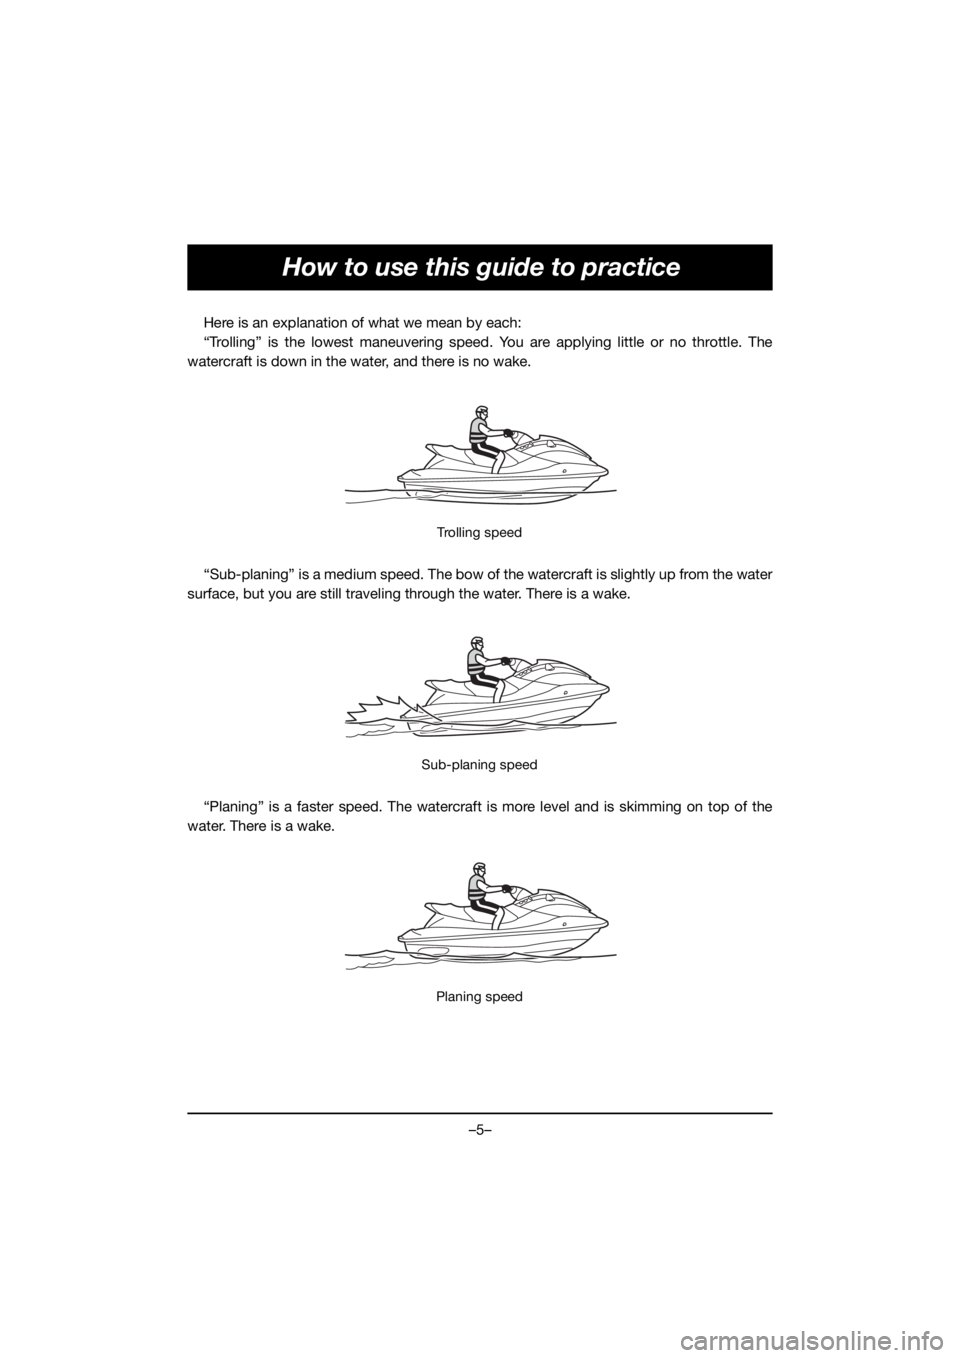 YAMAHA GP1800R SVHO 2020  Manuale duso (in Italian) –5–
How to use this guide to practice
Here is an explanation of what we mean by each:
“Trolling” is the lowest maneuvering speed. You are applying little or no throttle. The
watercraft is down